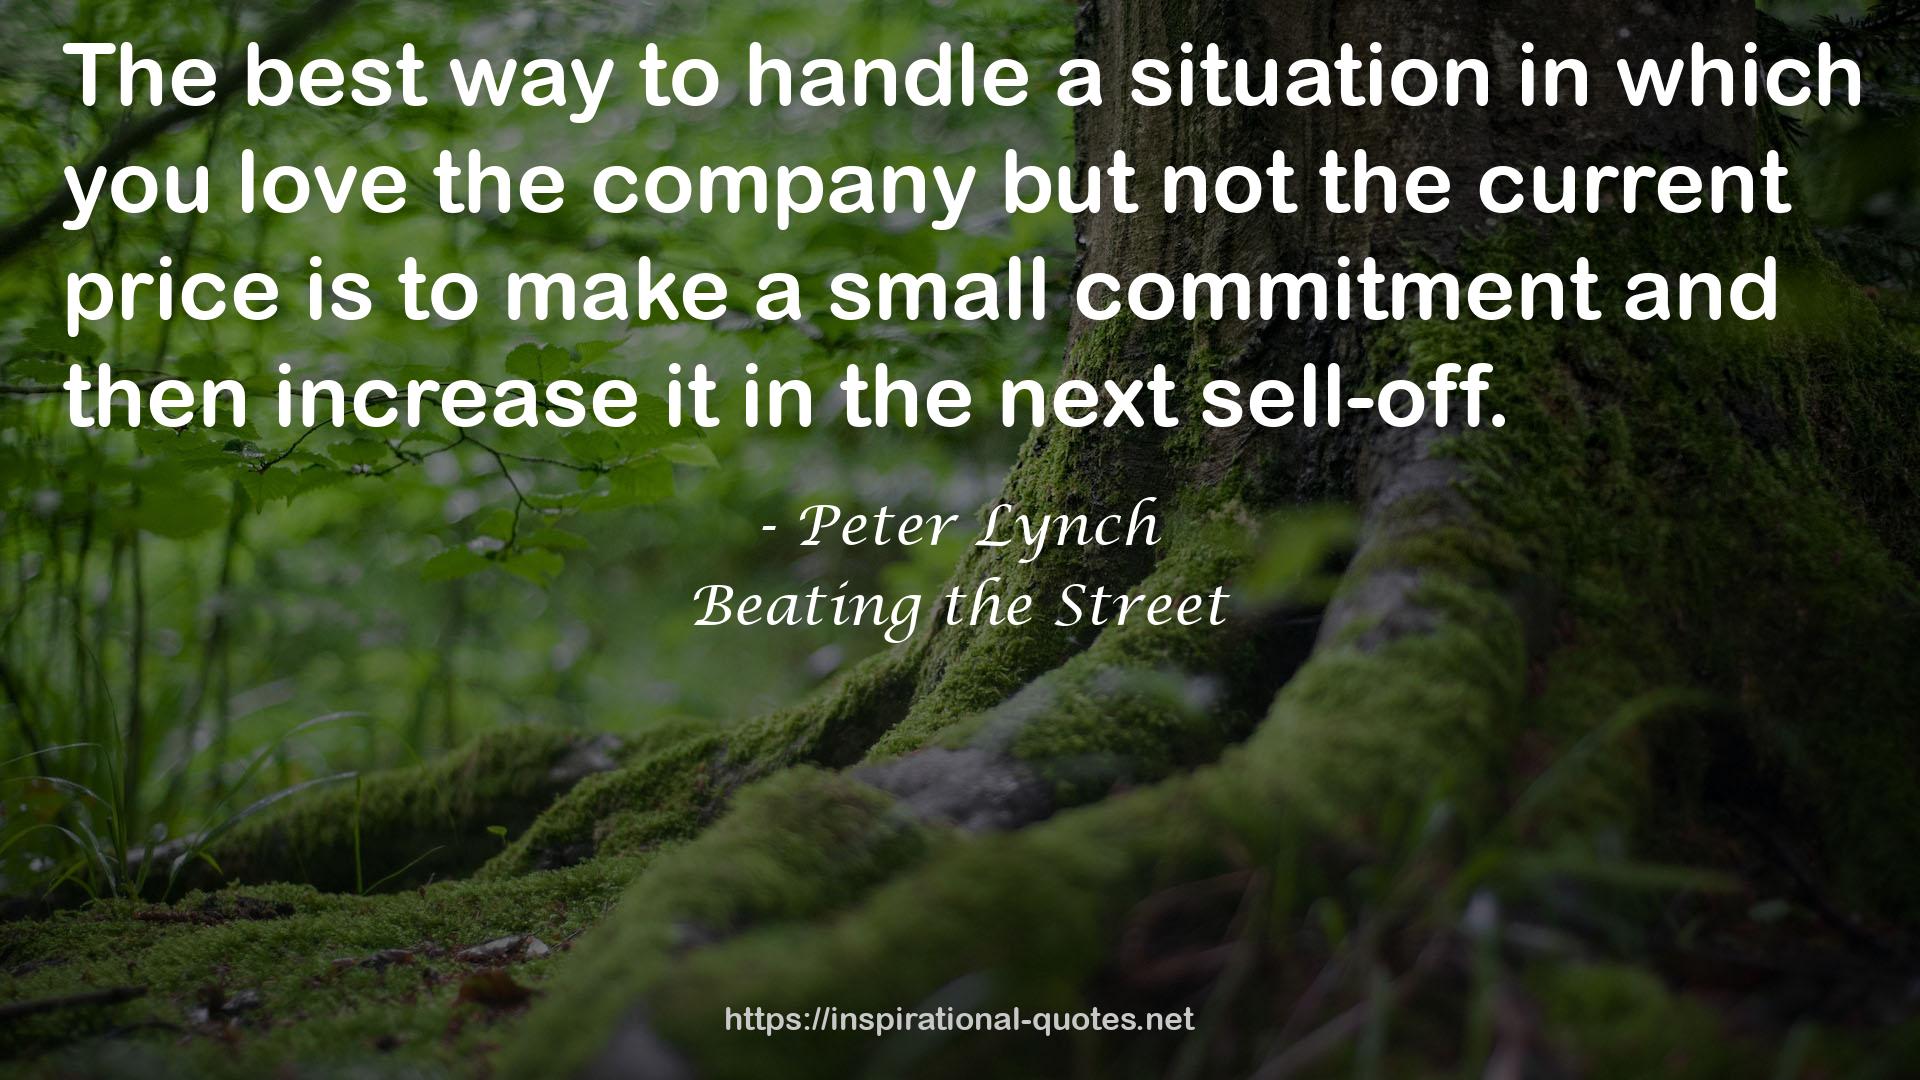 Peter Lynch QUOTES